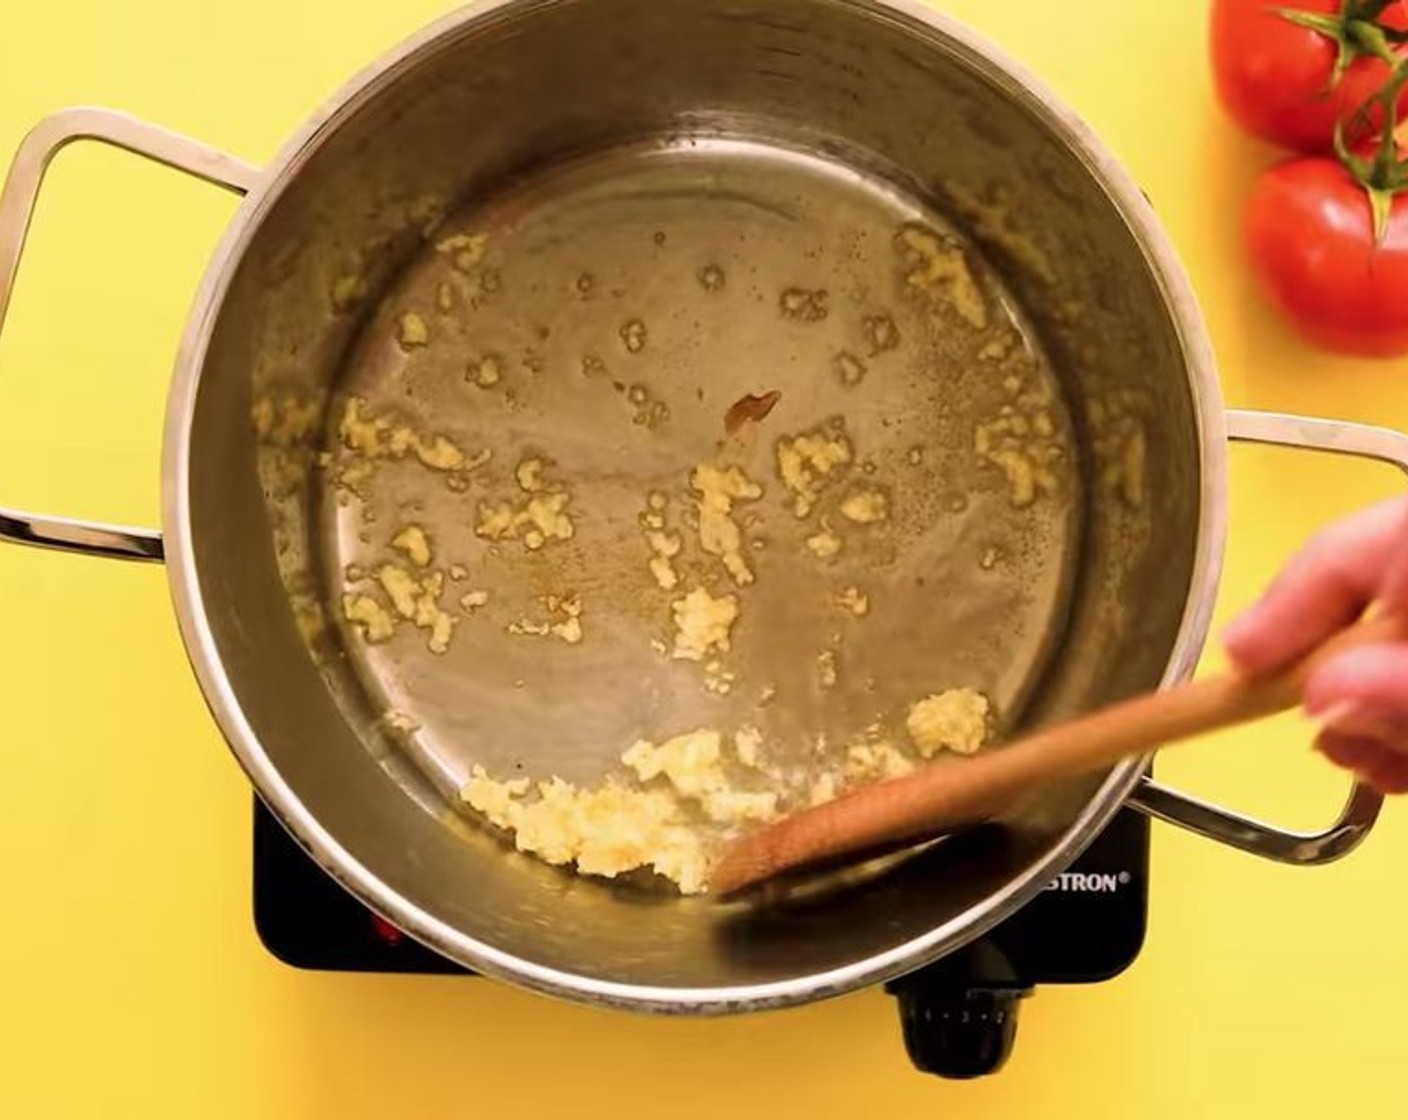 step 1 Heat Olive Oil (1 Tbsp) in a saucepan over medium heat, then add Garlic (3 cloves) and cook about 2 minutes.